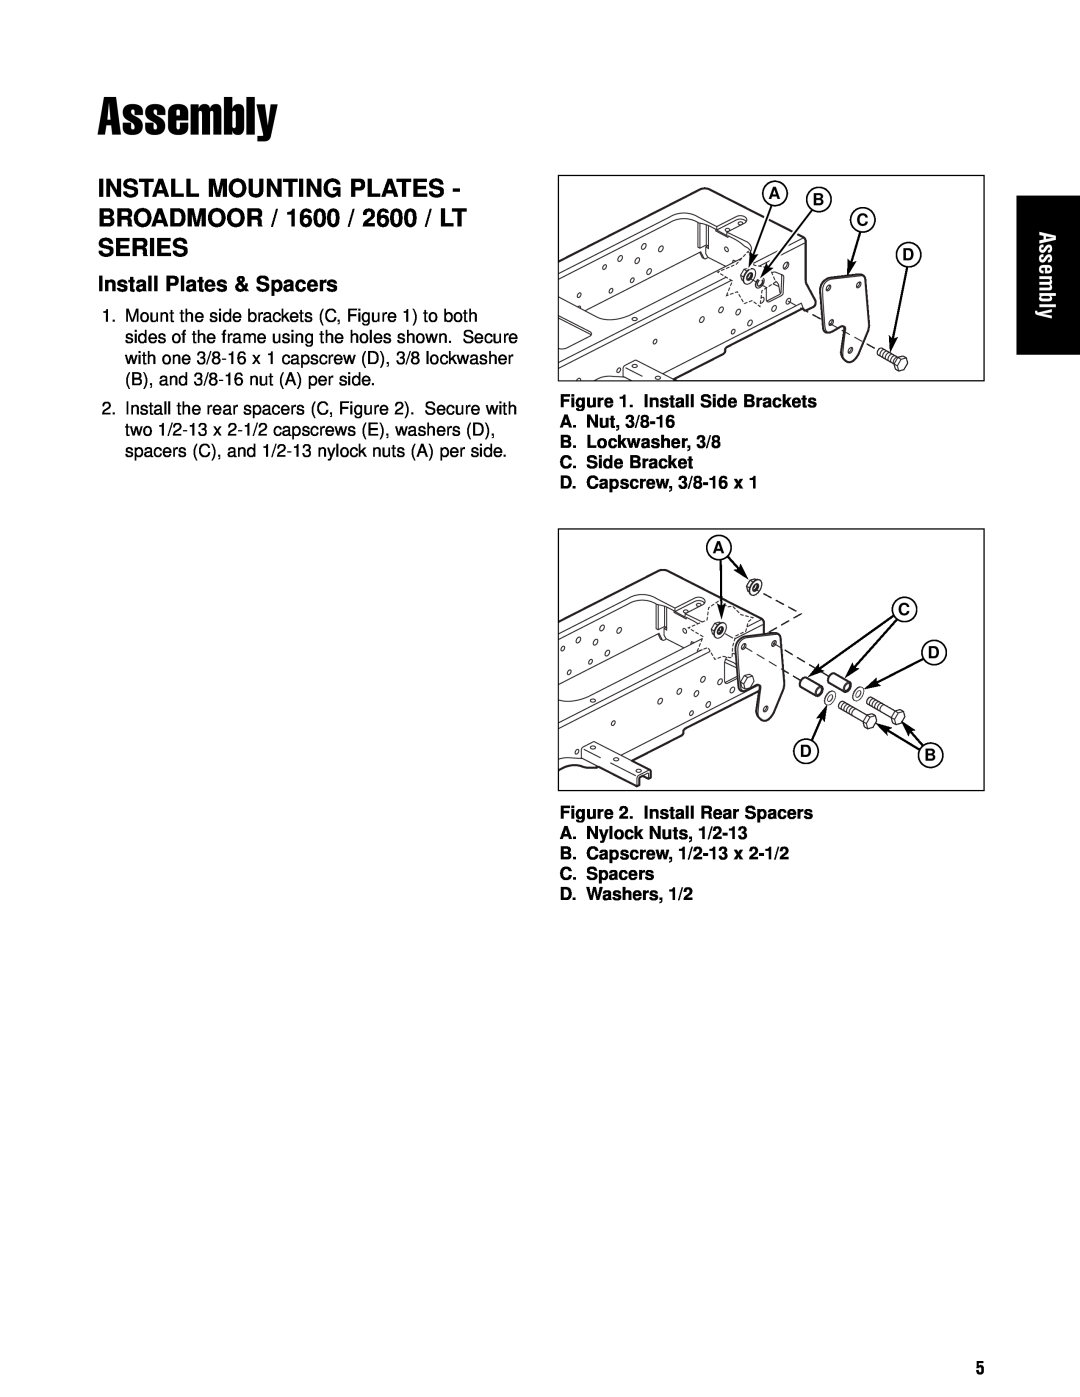 Briggs & Stratton 1695353 manual INSTALL MOUNTING PLATES - BROADMOOR / 1600 / 2600 / LT SERIES, Assembly 